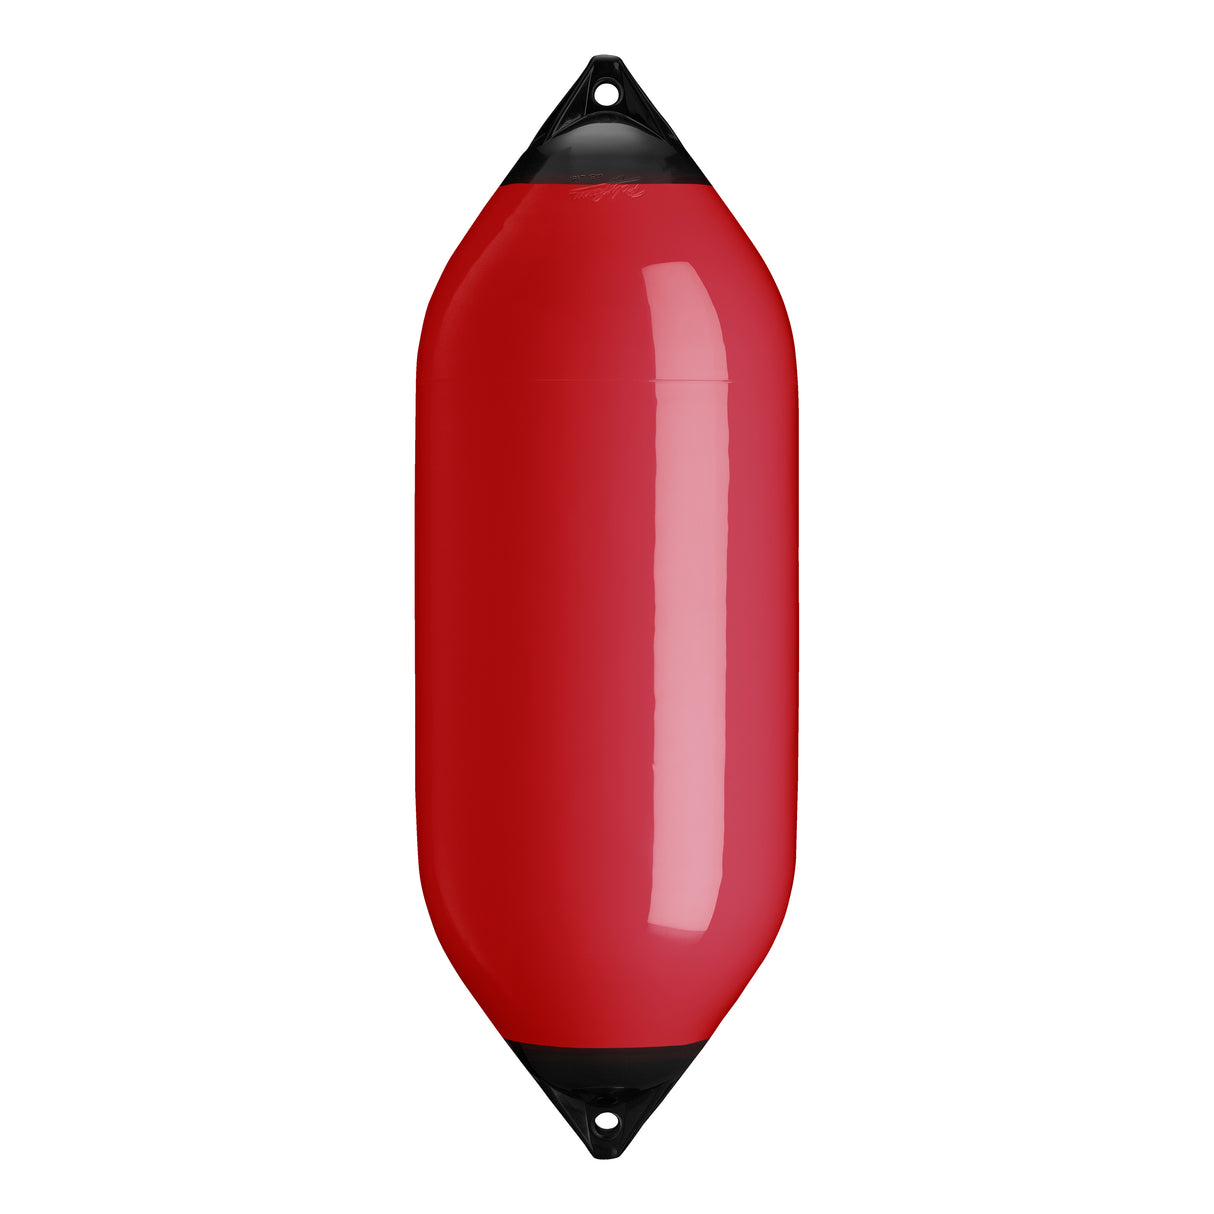 Classic Red boat fender with Navy-Top, Polyform F-10